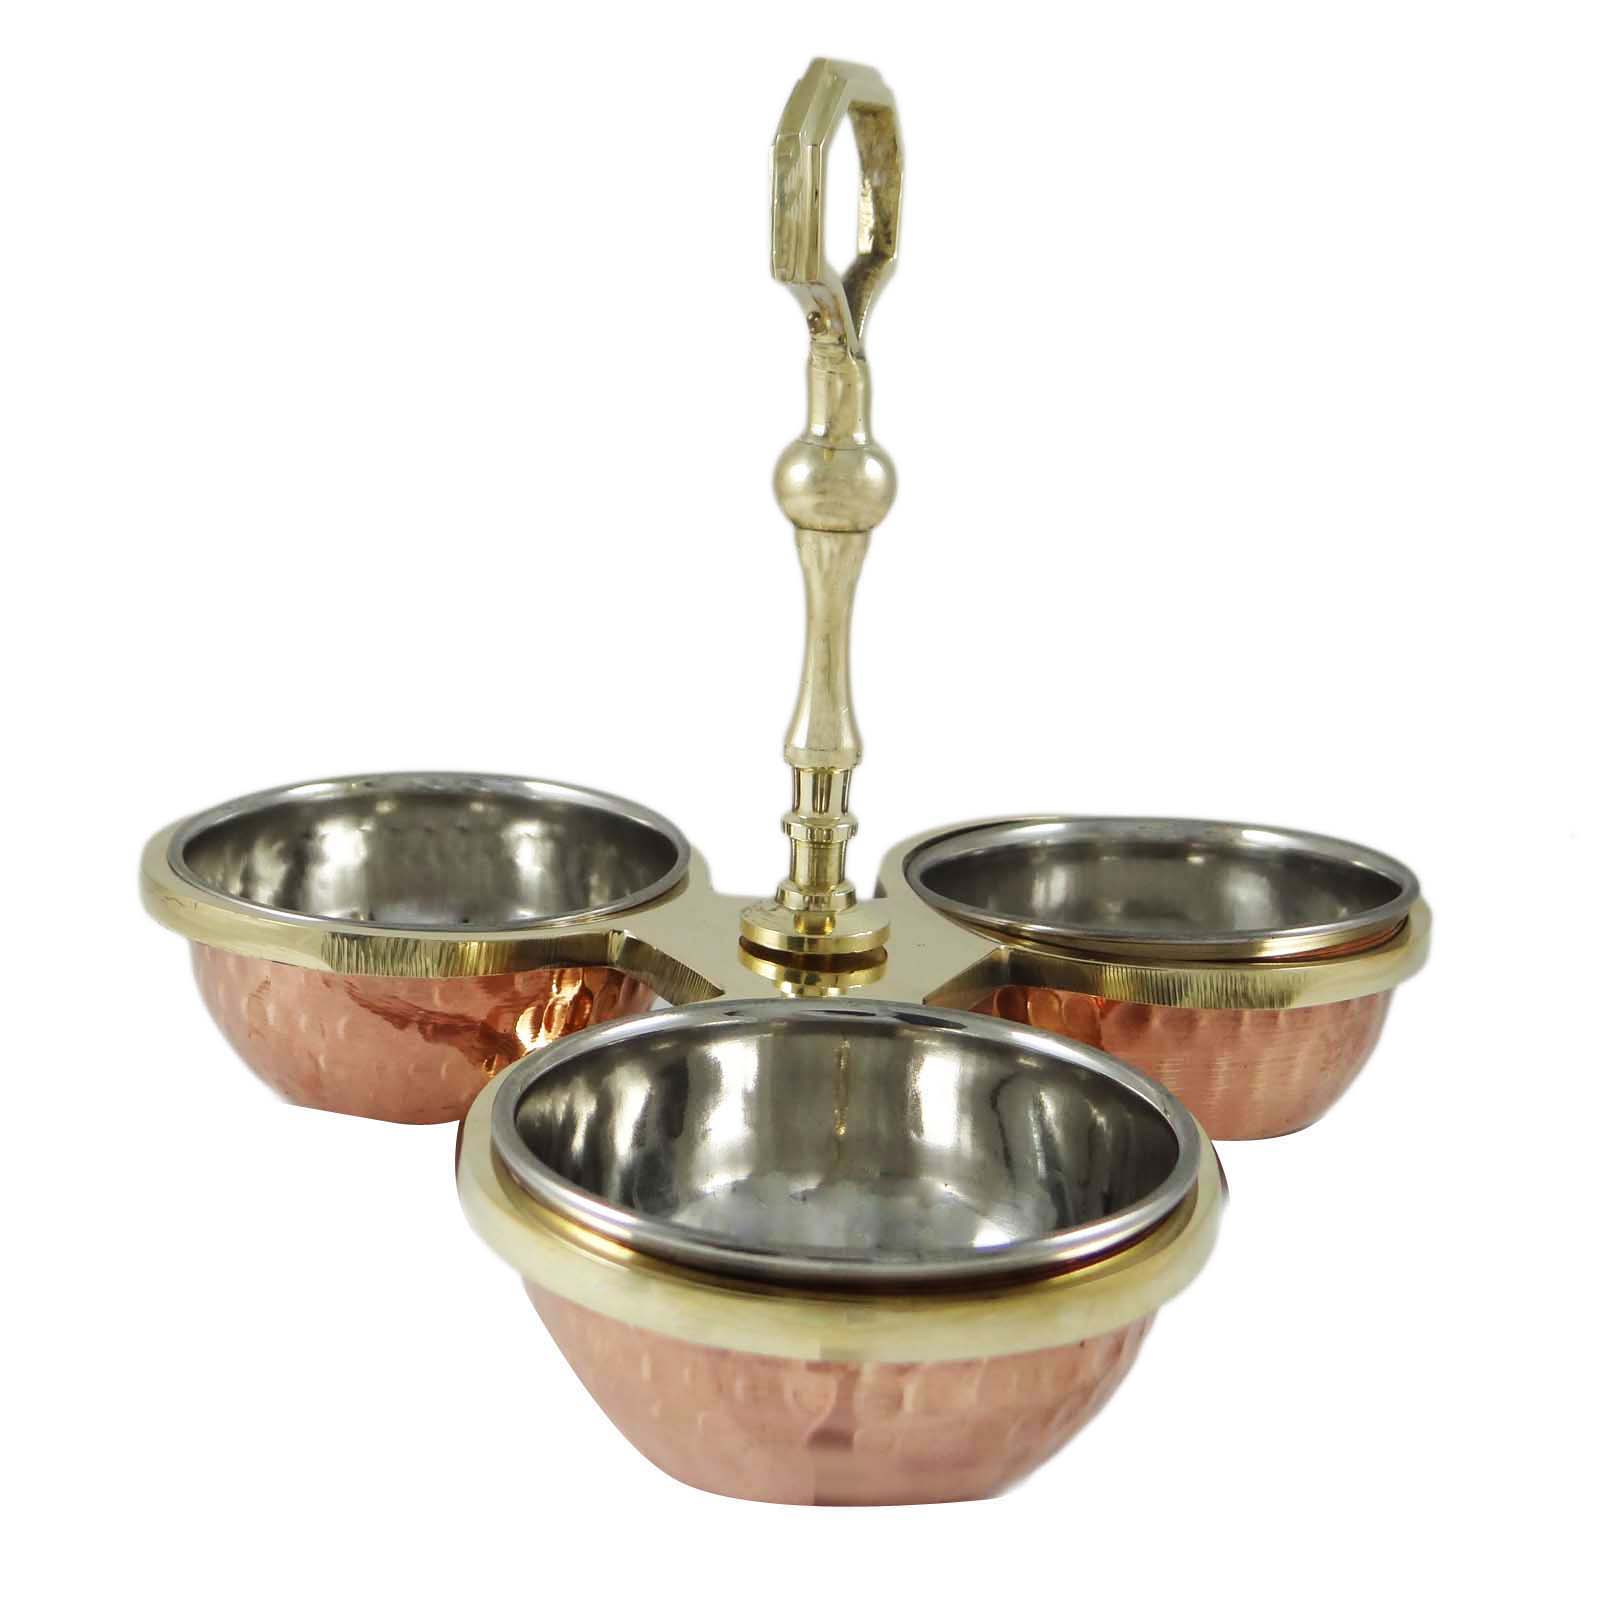 Dinnerware For Indian Best Side Dishes Condiment Pickle Holder 3 Bowls Pcs 